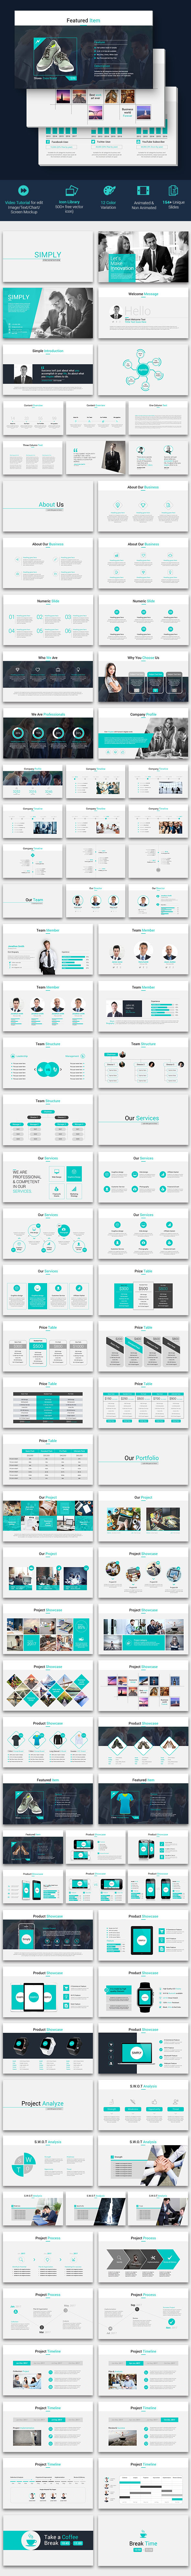 Simply - Pro & Editable Powerpoint Presentation Template